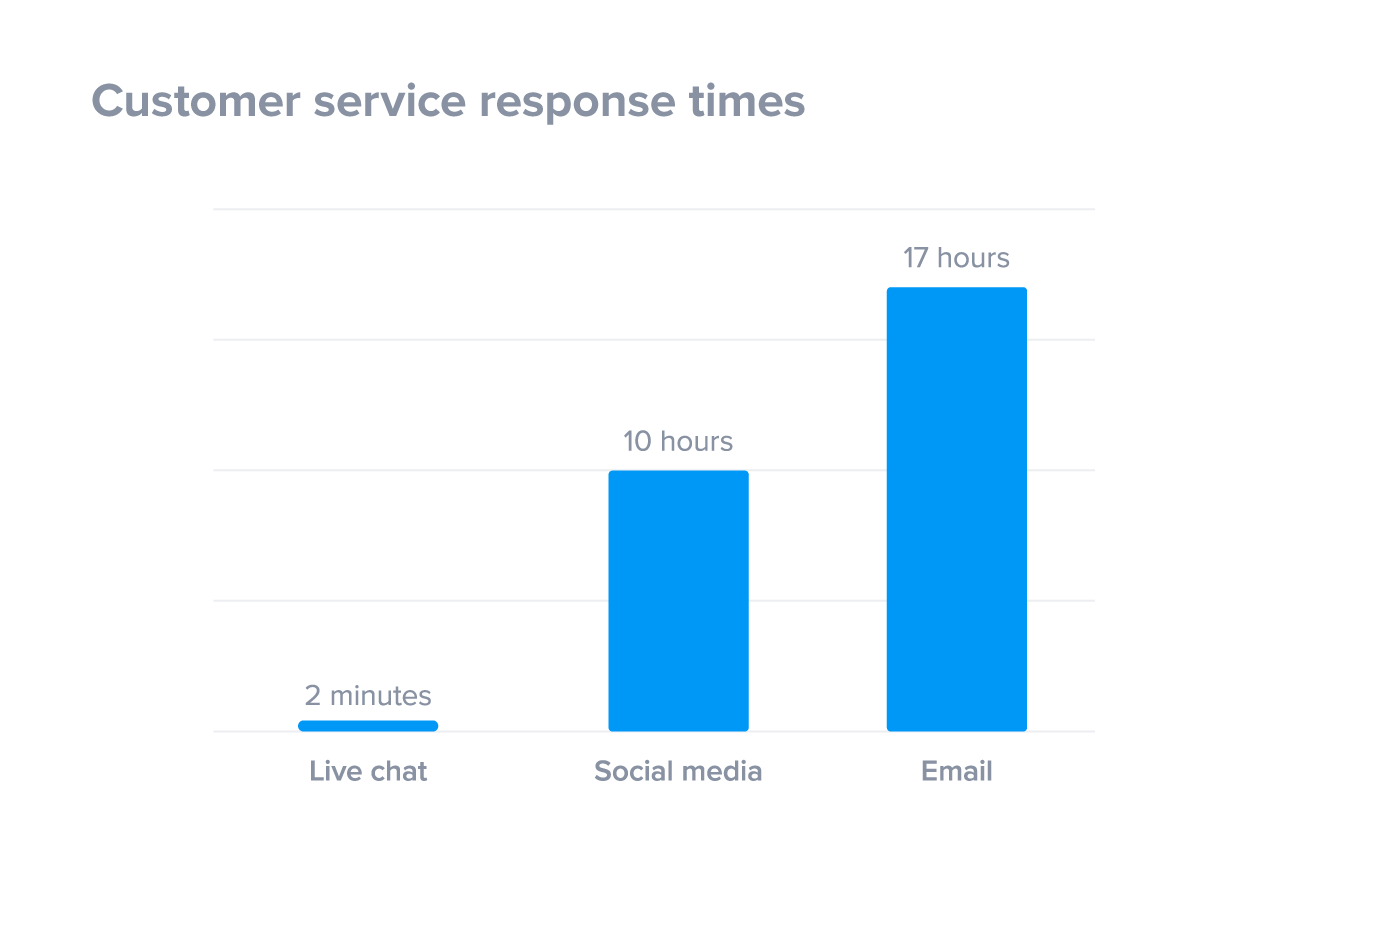 Customer service response times, by channel